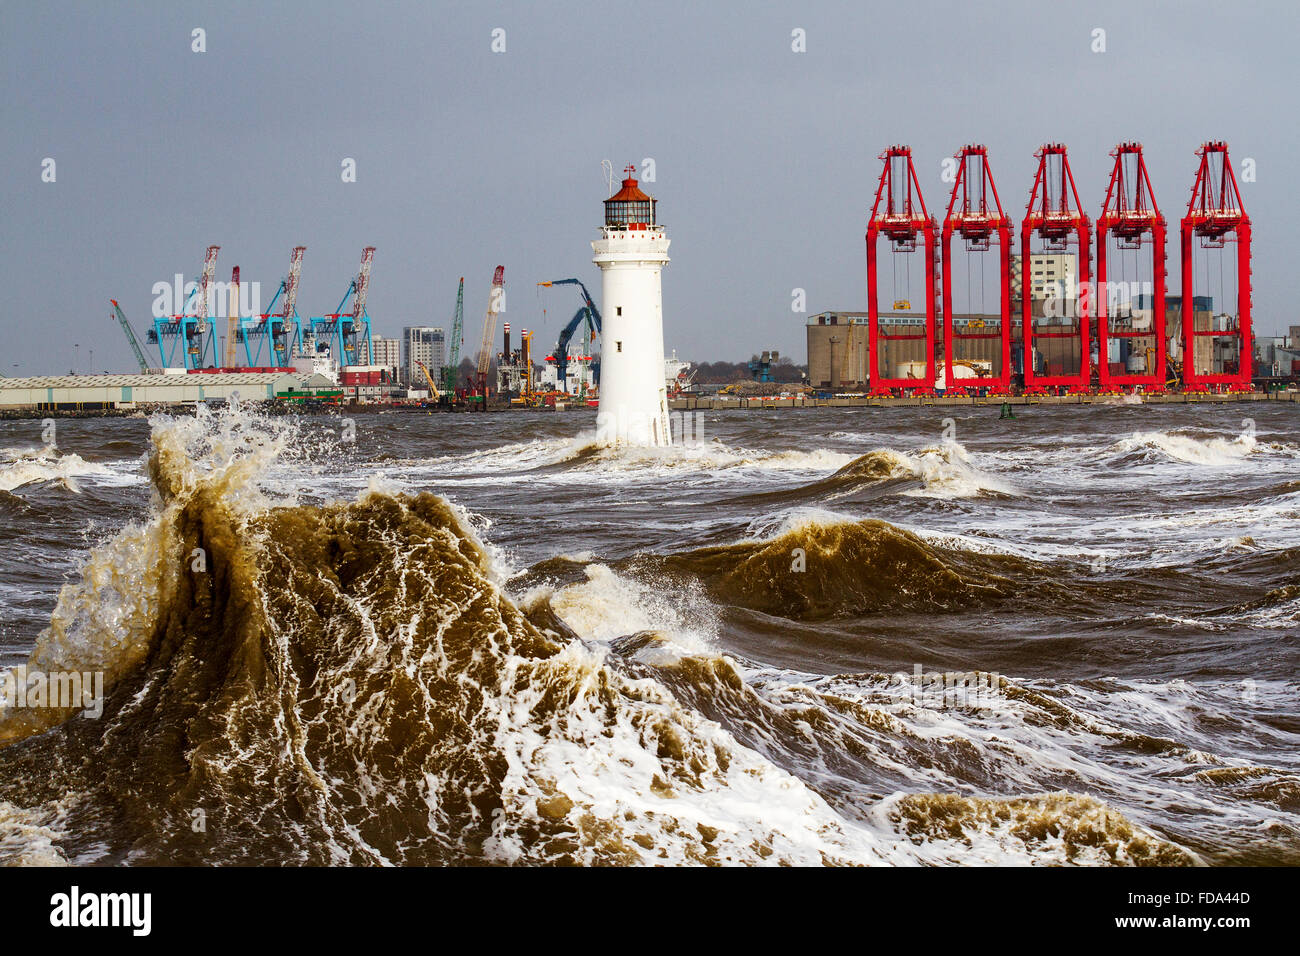 New Brighton, Wirral, UK 29th January, 2016.  UK Weather.  High winds and rough seas coastline, seascape, shore at Merseyside being experienced in the River Mersey Estuary near the Fort Perch Lighthouse. Stock Photo